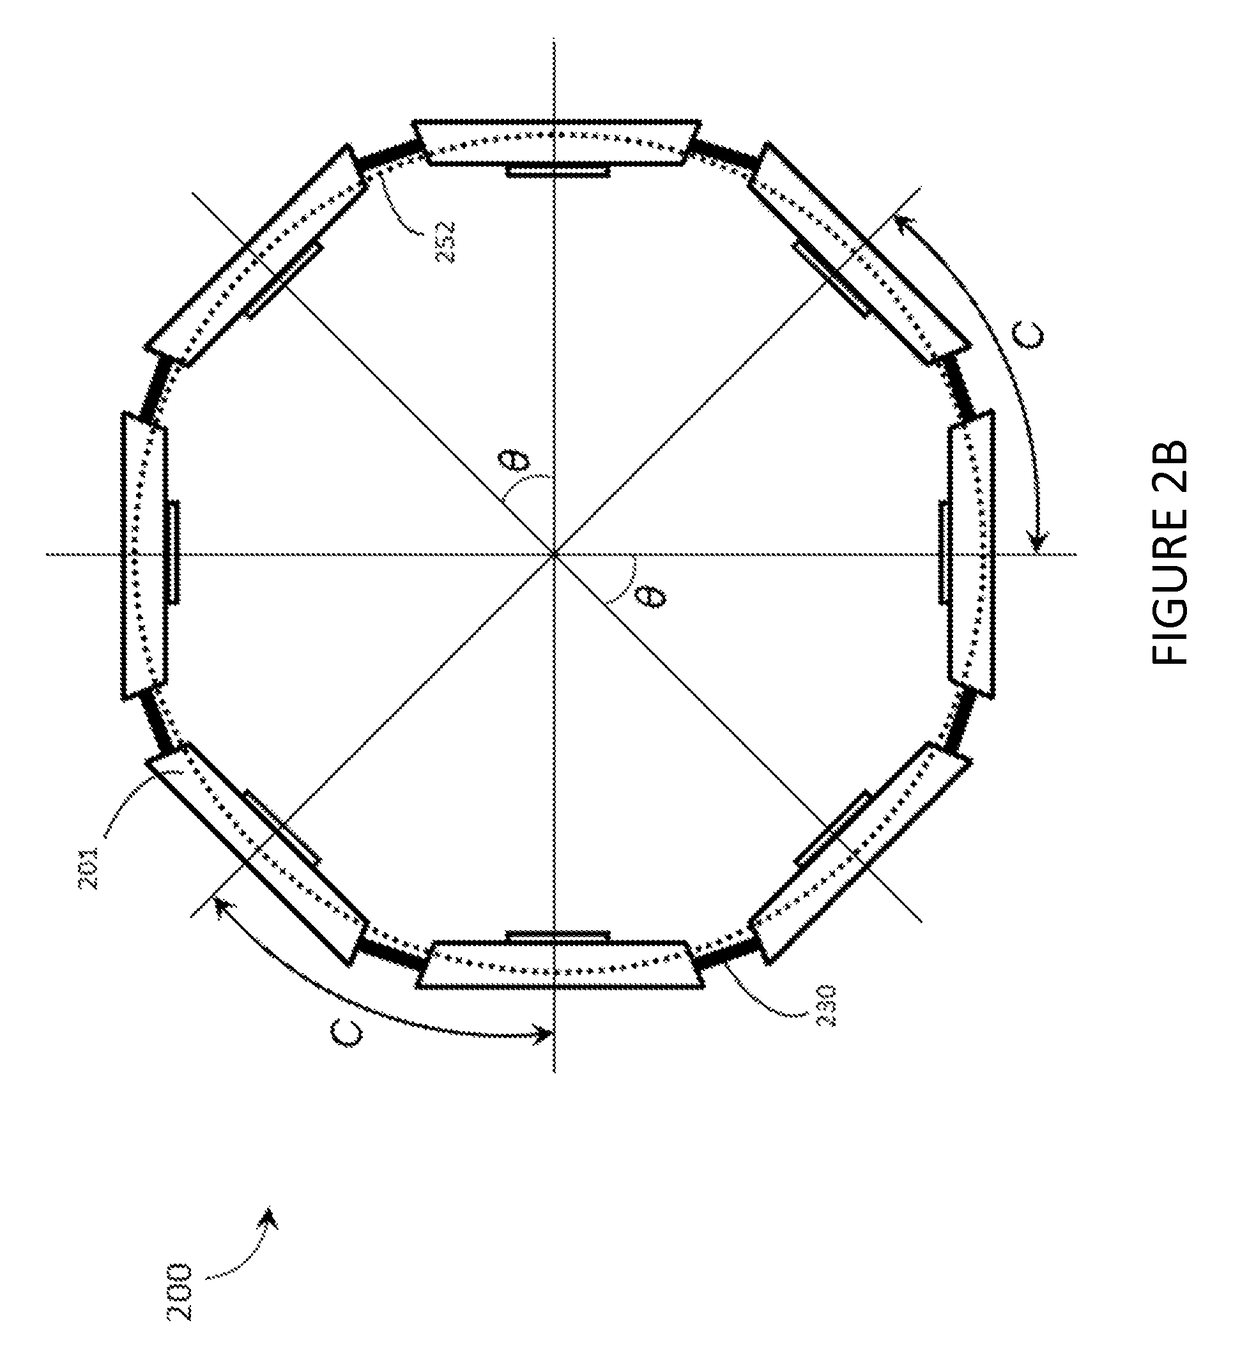 Systems, articles and methods for wearable electronic devices that accommodate different user forms